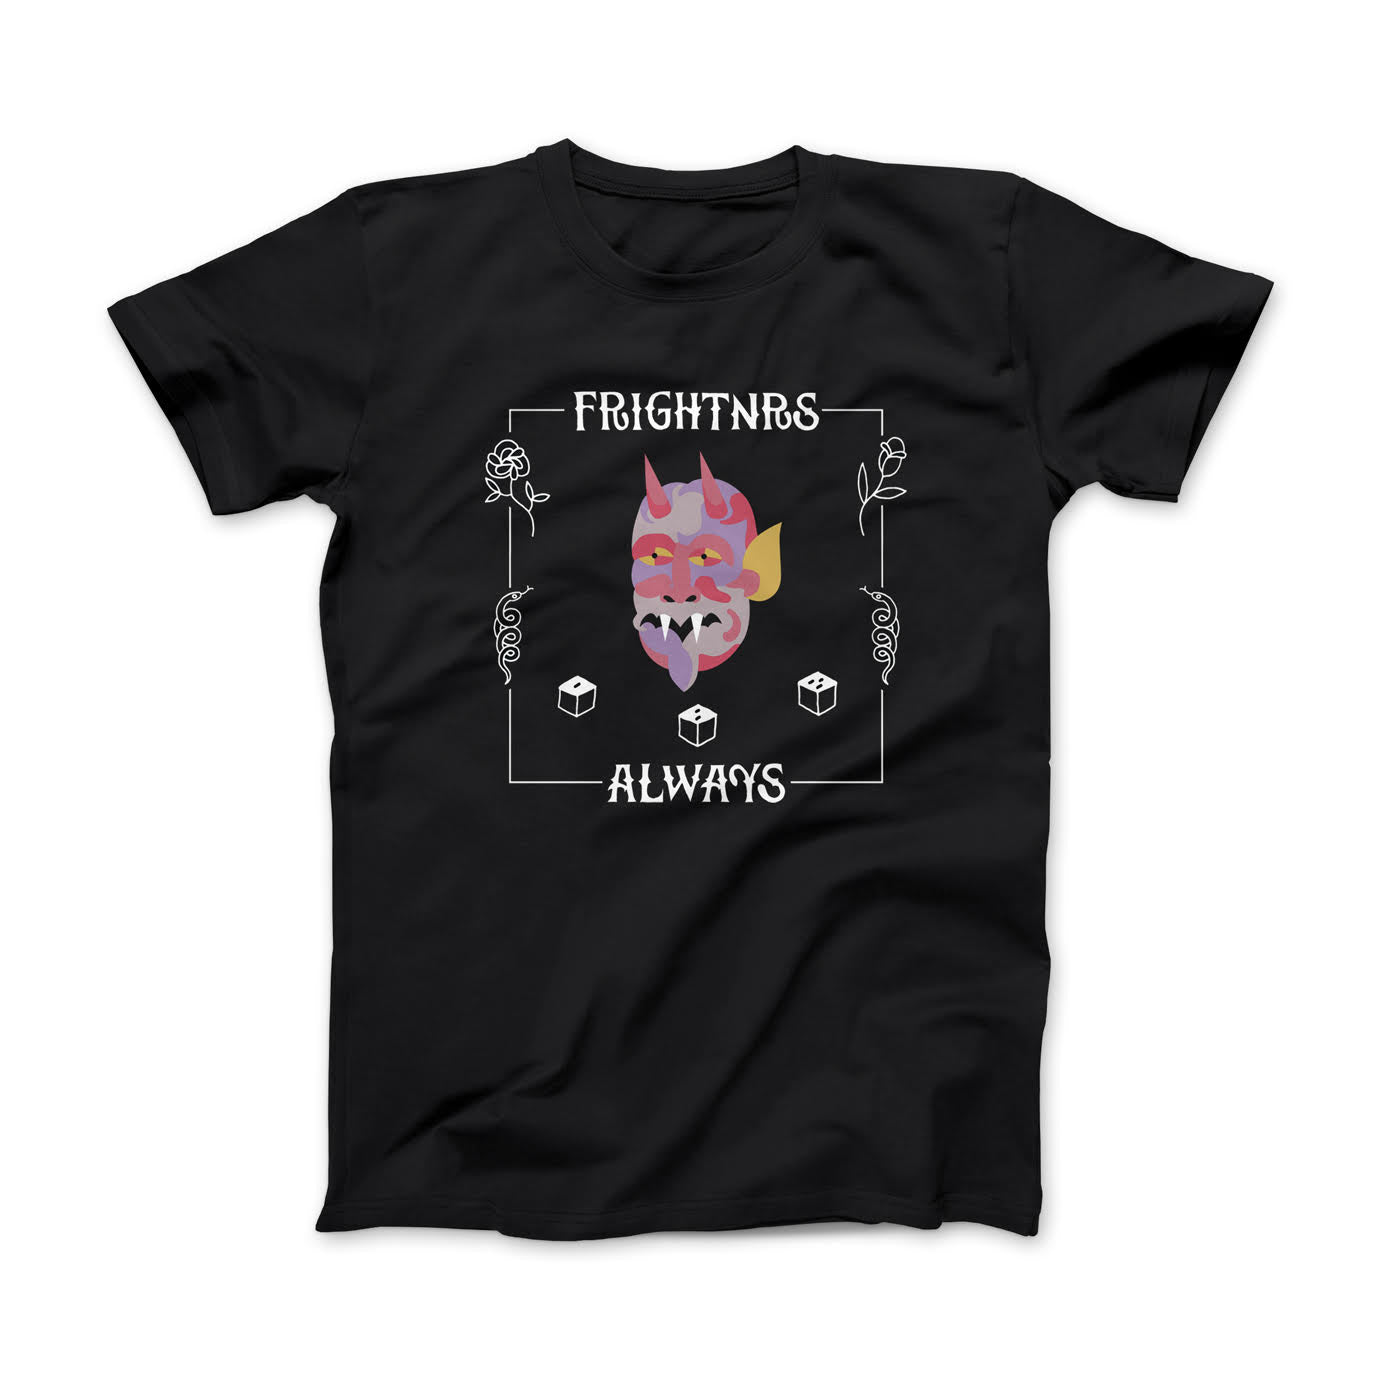 The Frightnrs "Always" T-shirt (Color)